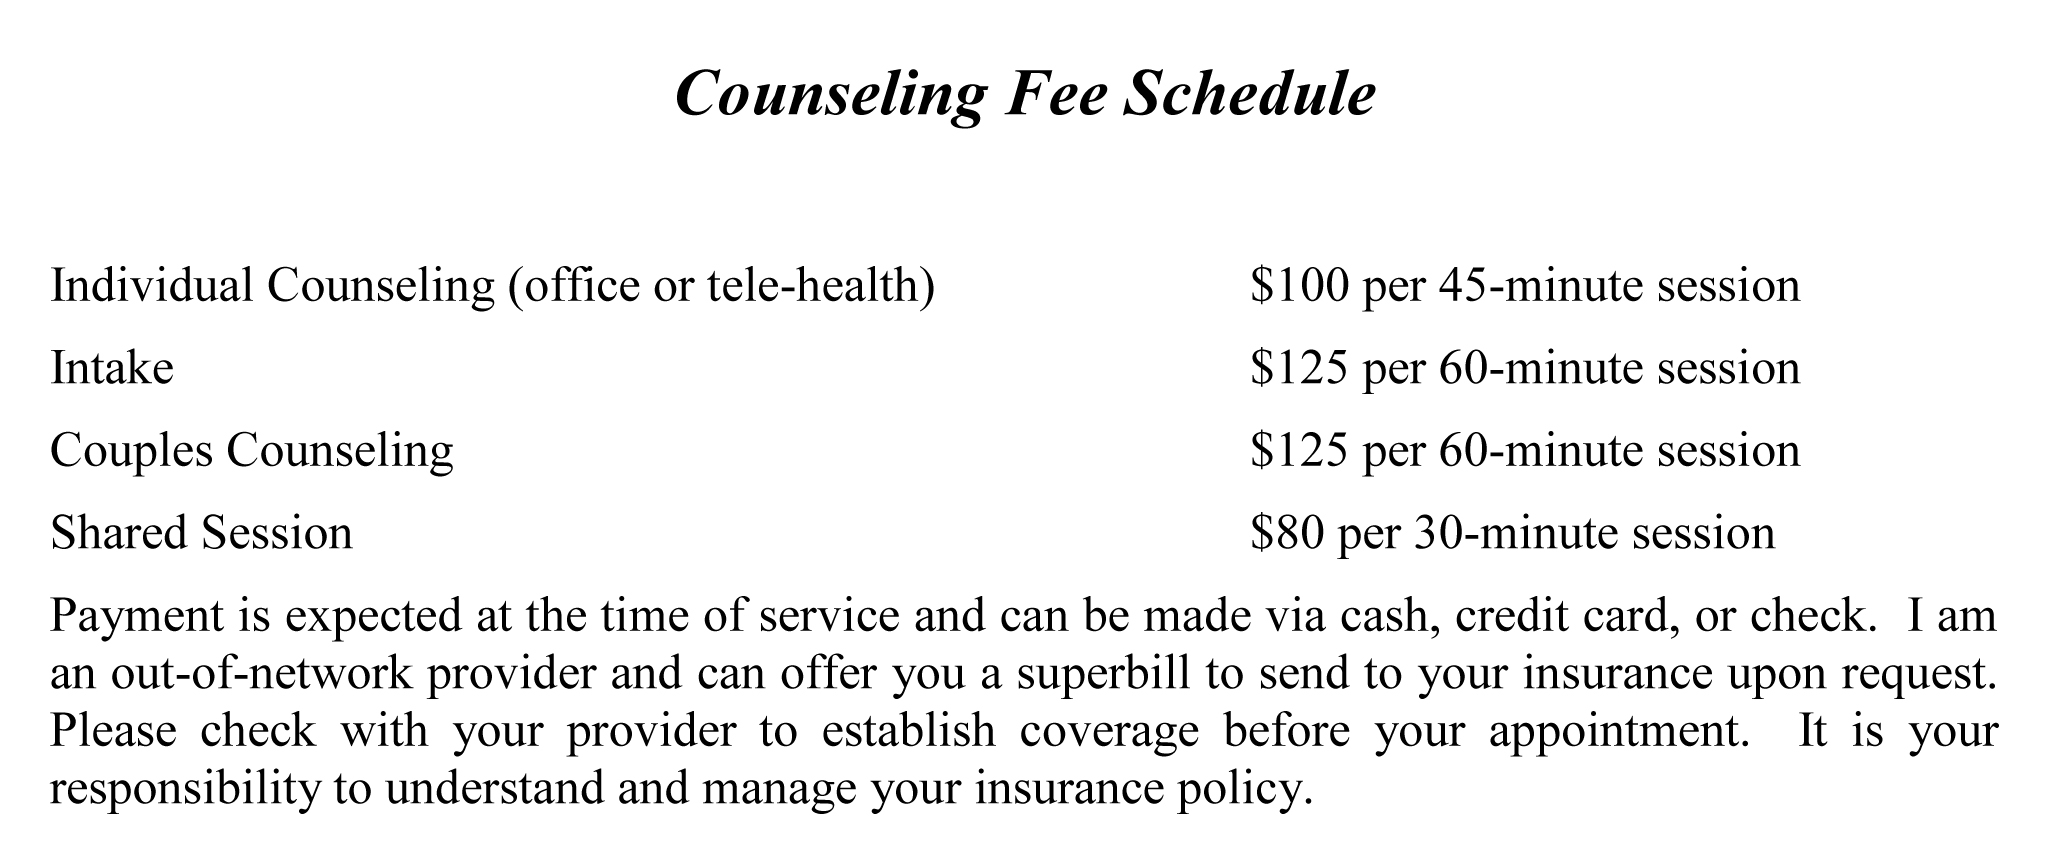 Fee Schedule Perspective Counseling Services